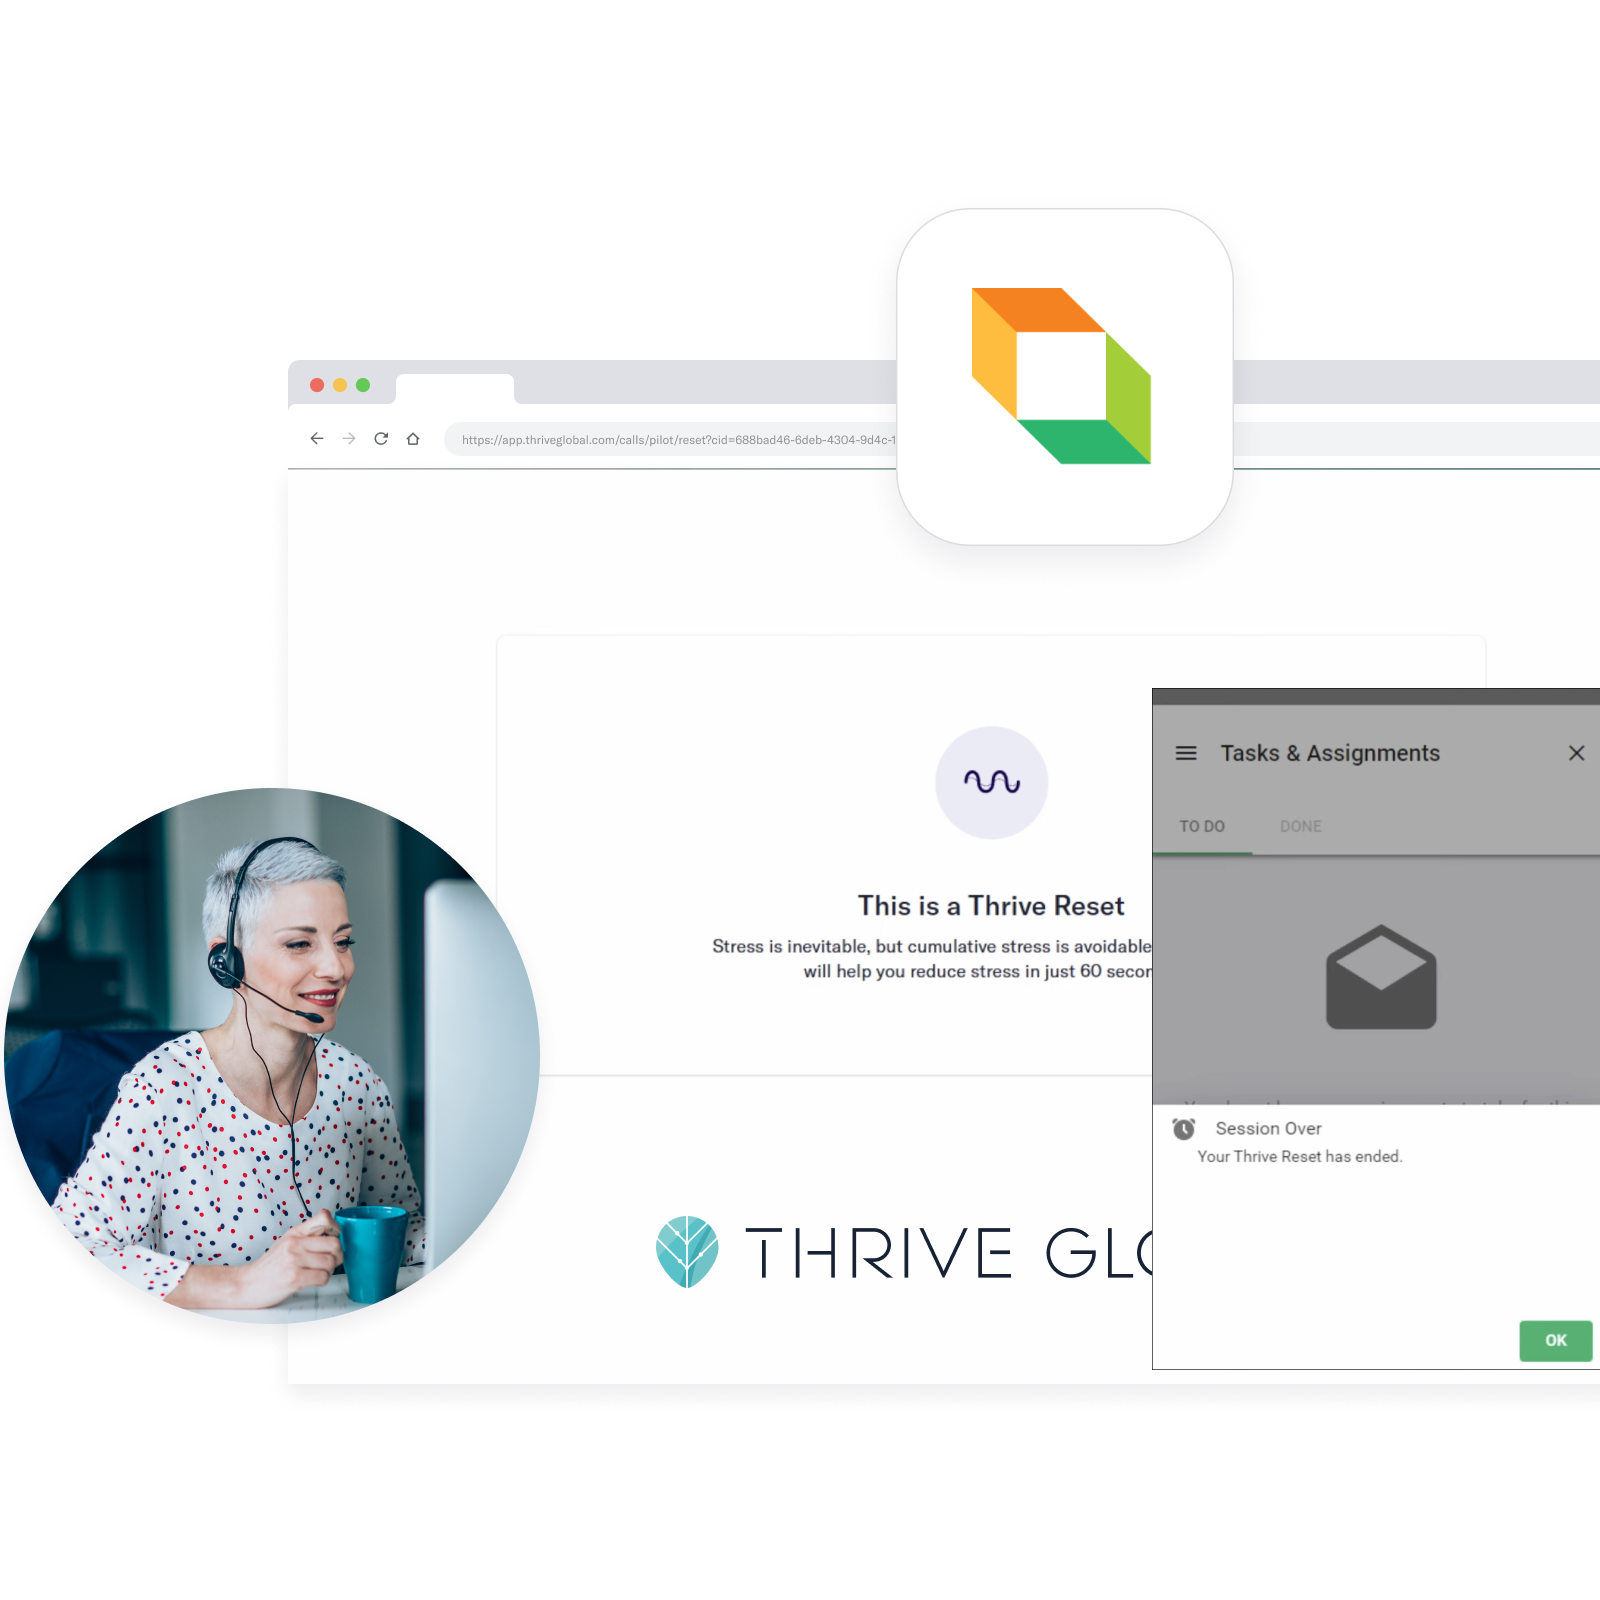 The Thrive Platform drives productivity through well-being.